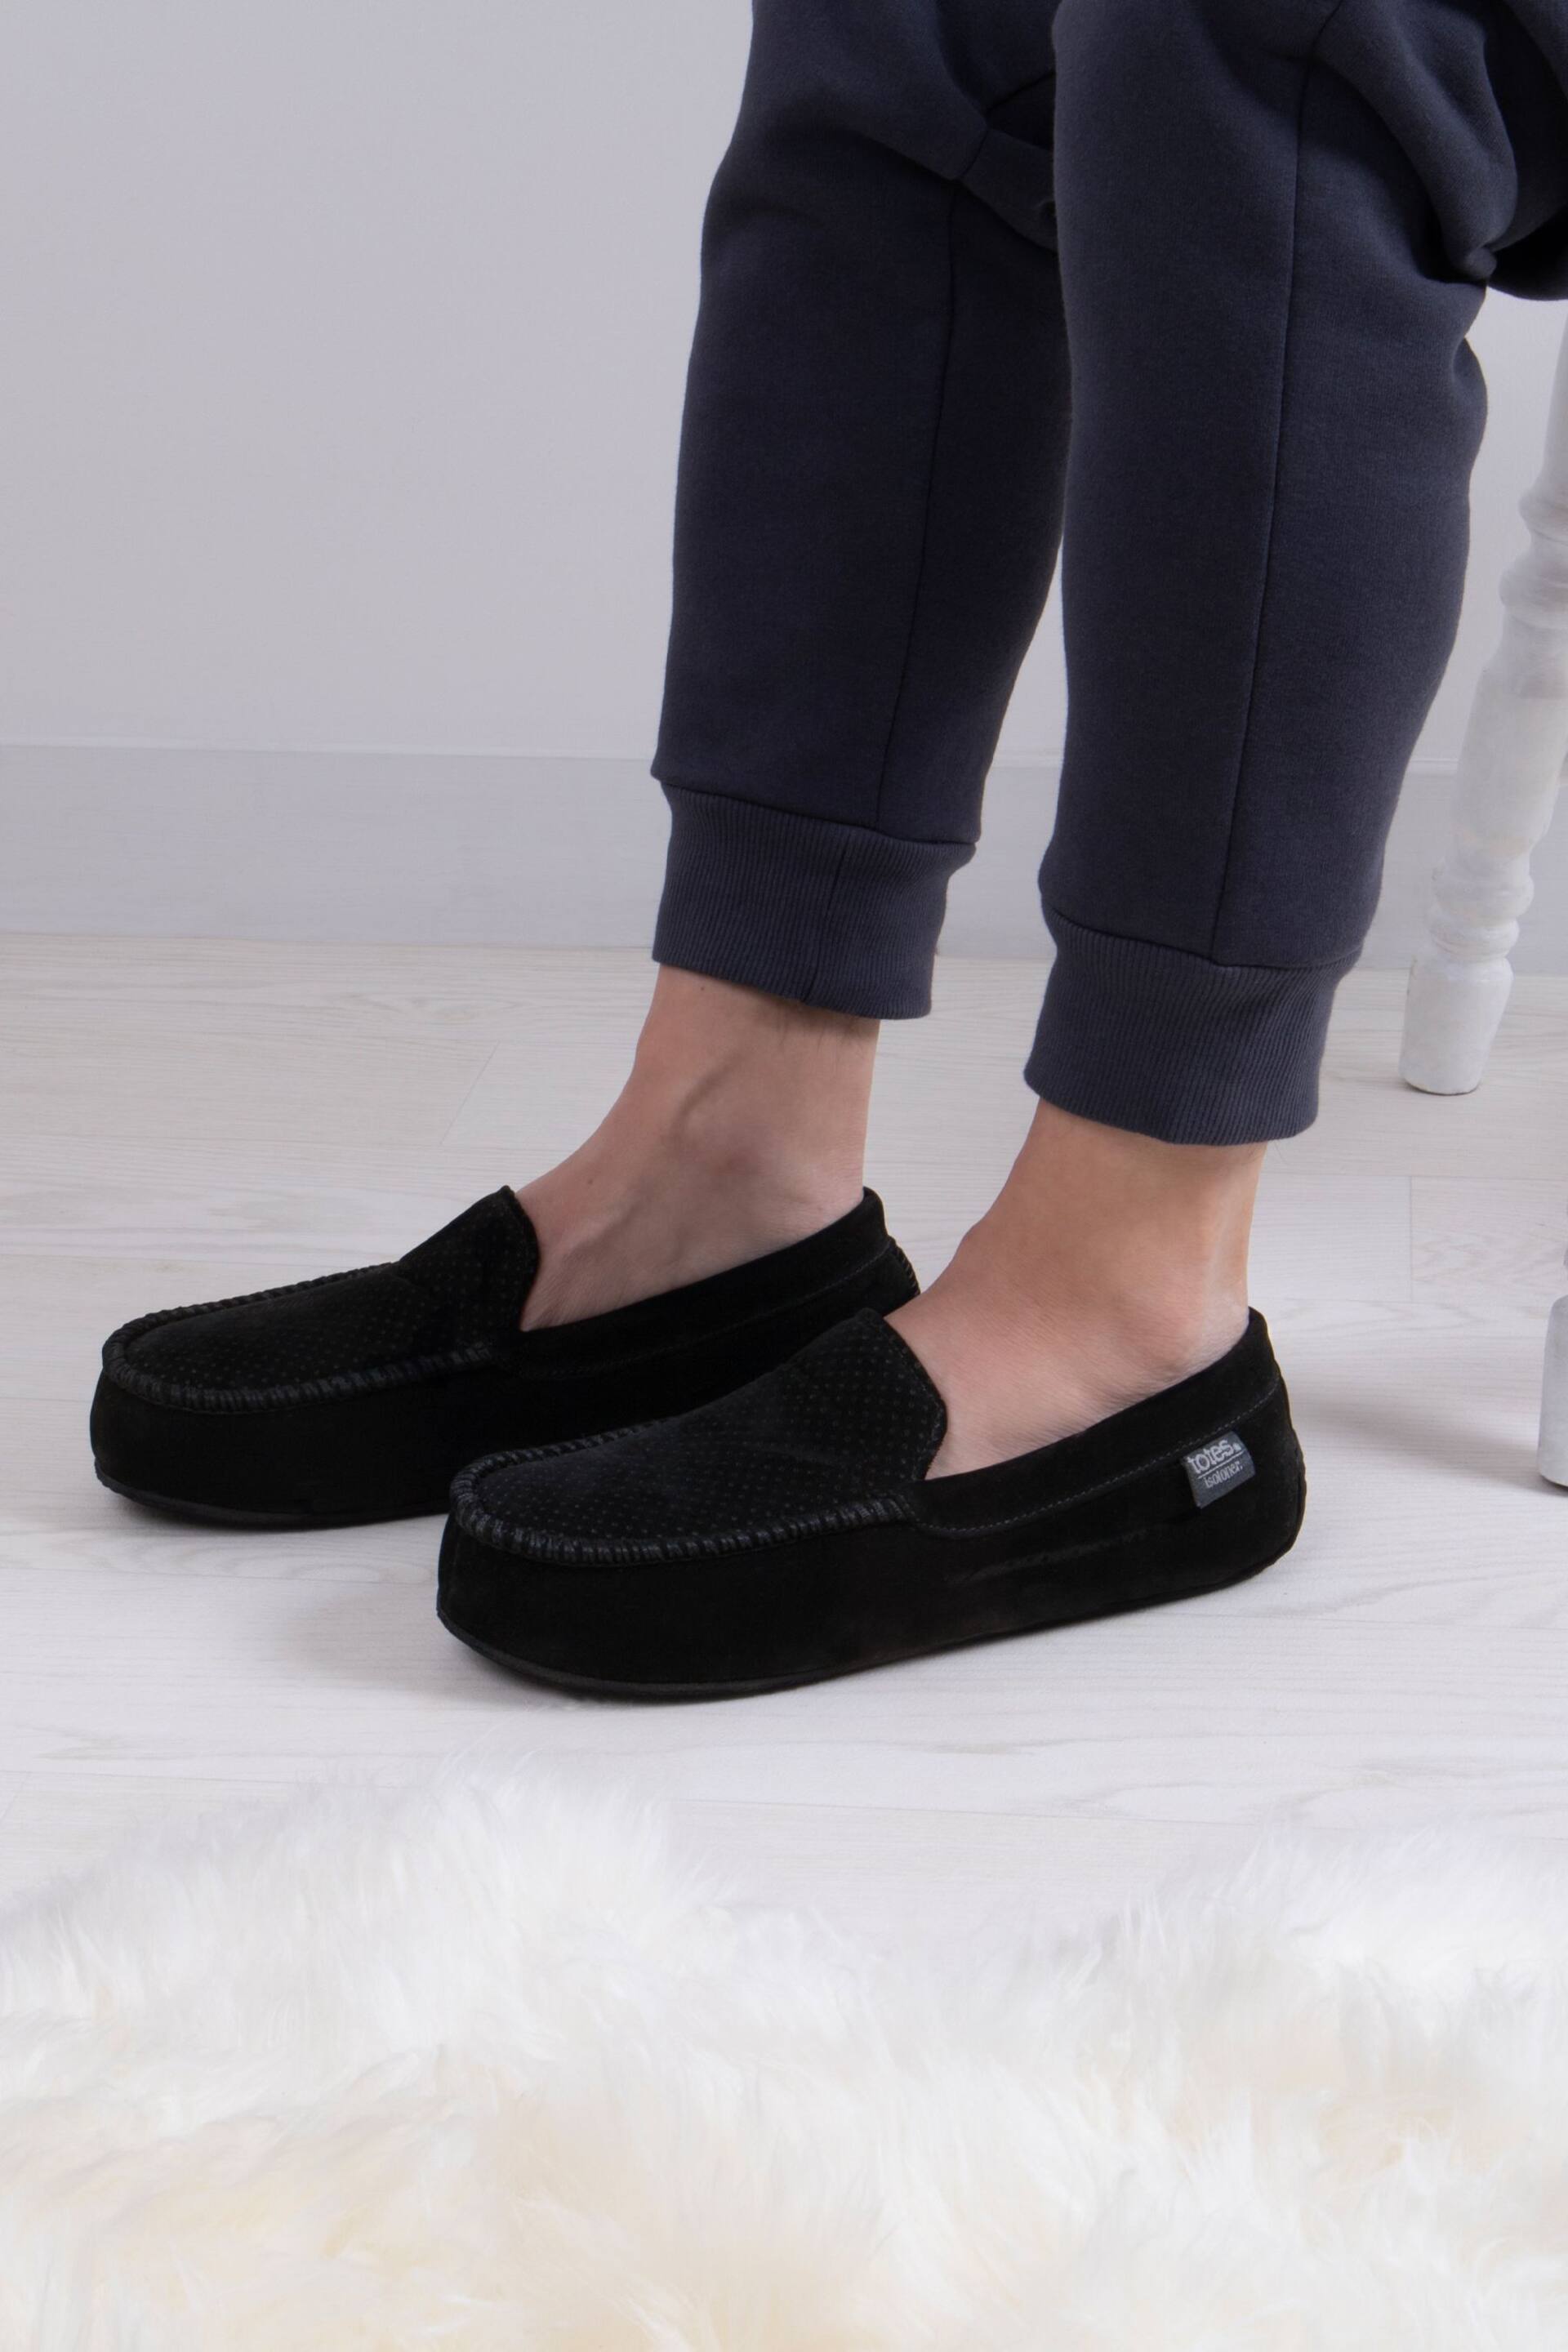 Totes Black Isotoner Airtex Suedette Mules Slippers - Image 1 of 5